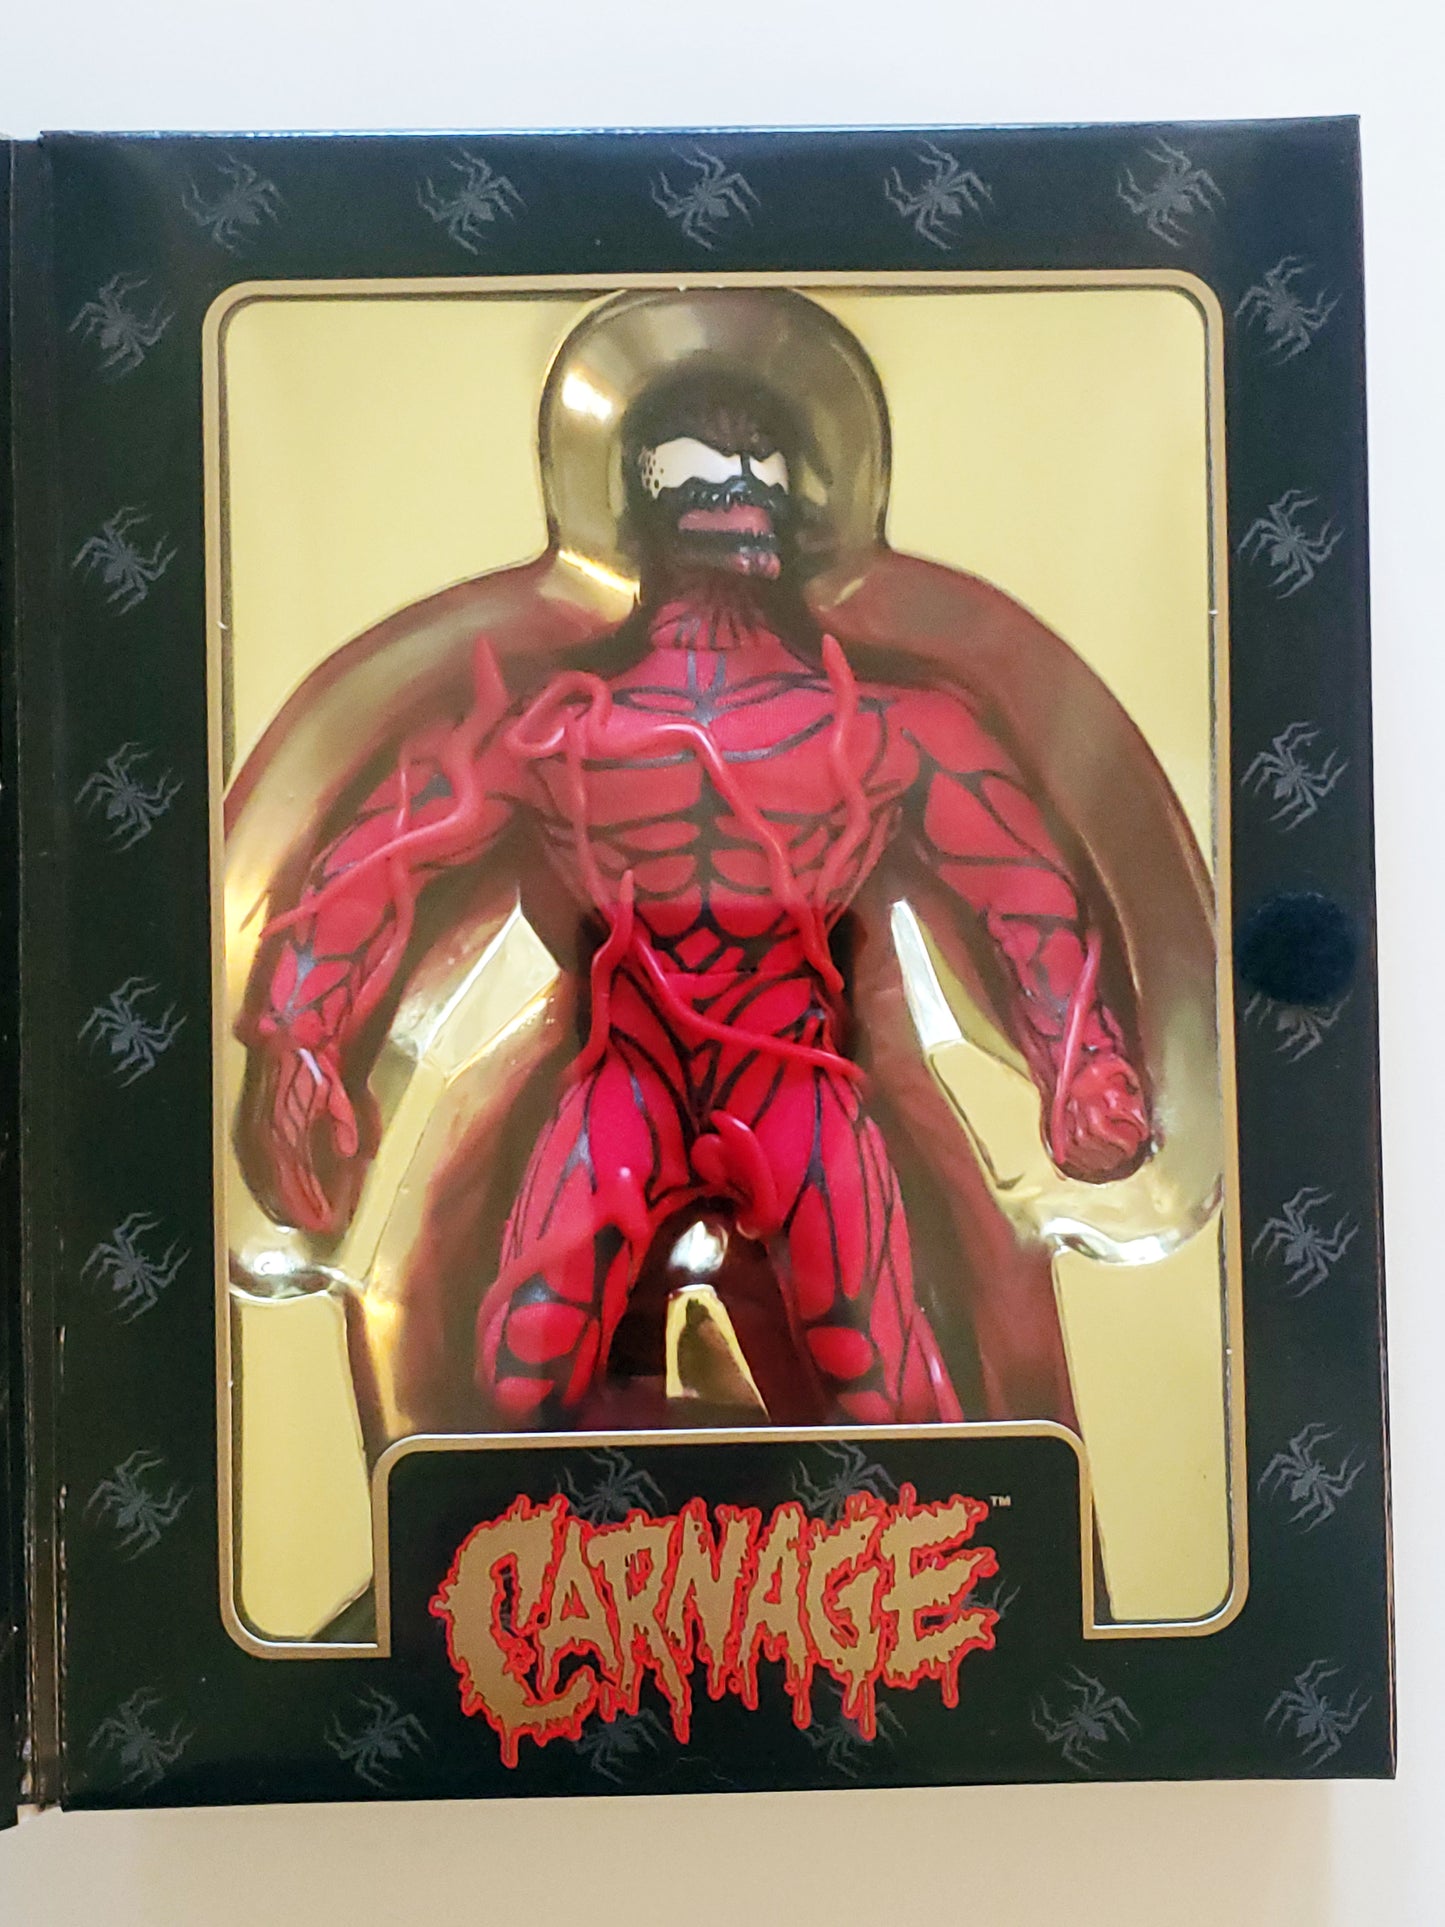 Previews Exclusive Carnage from Marvel Famous Cover Series